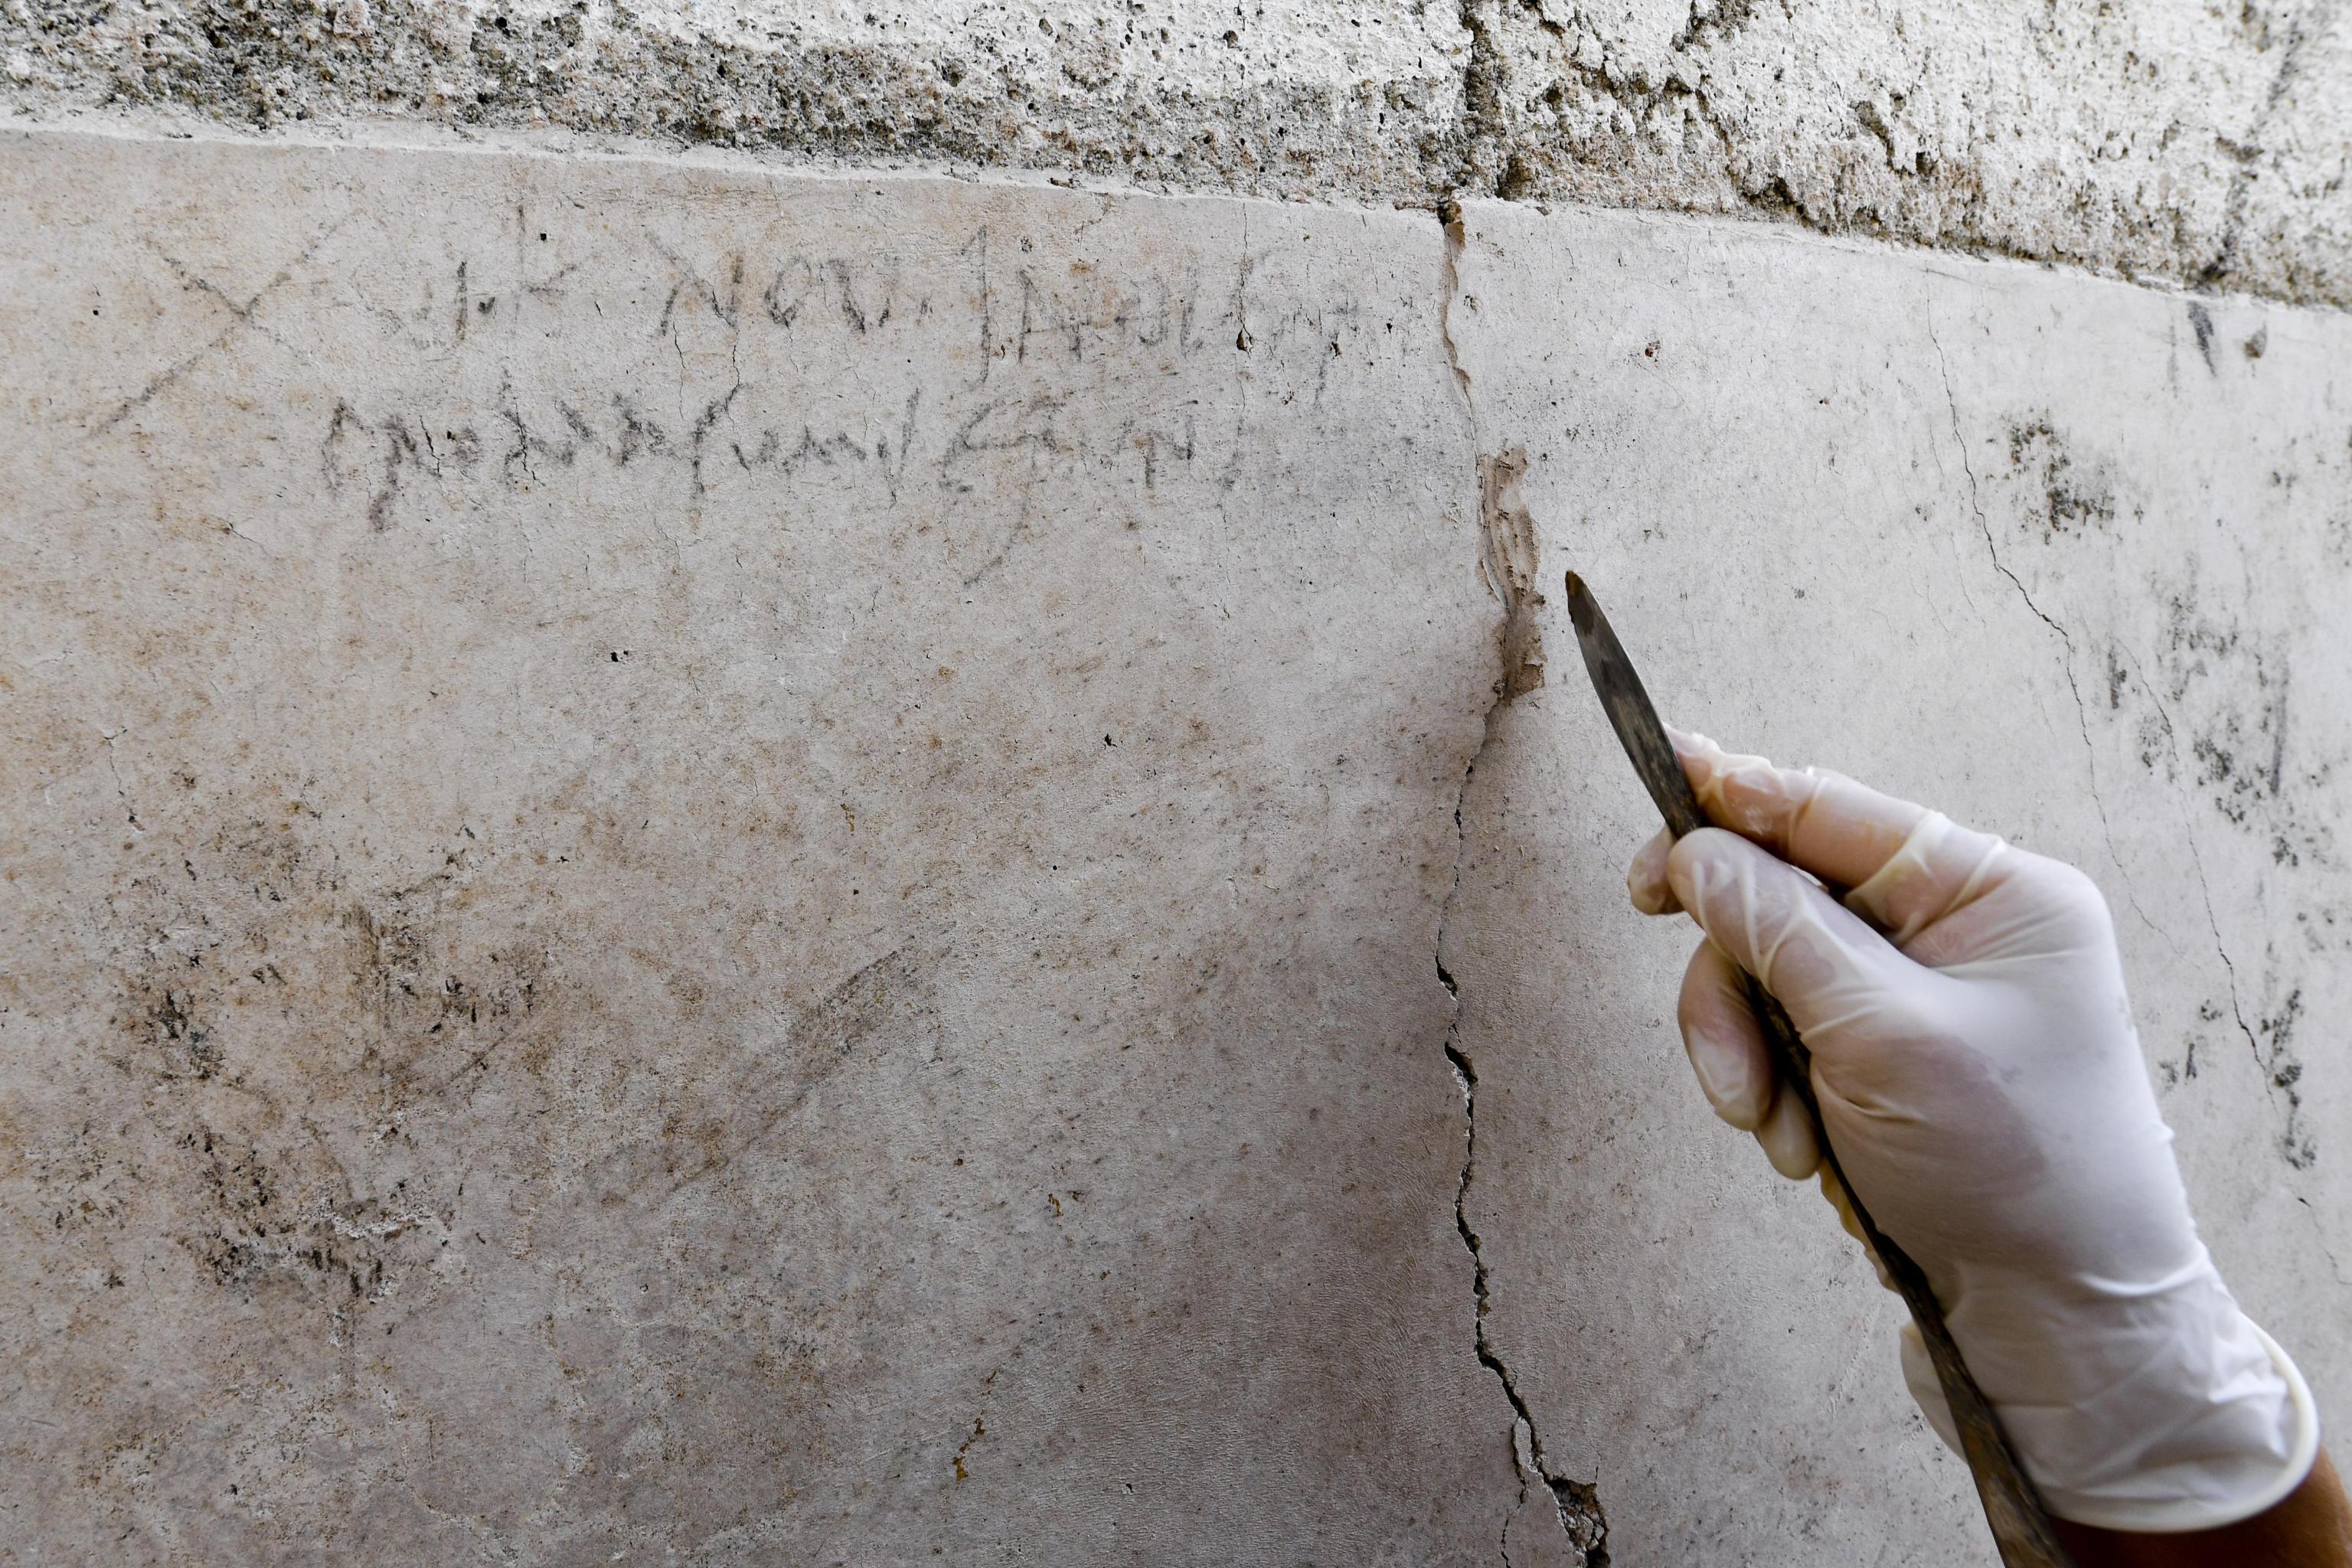 An archaeologist checks inscriptions on a wall during new excavations at the Pompeii archaeological site